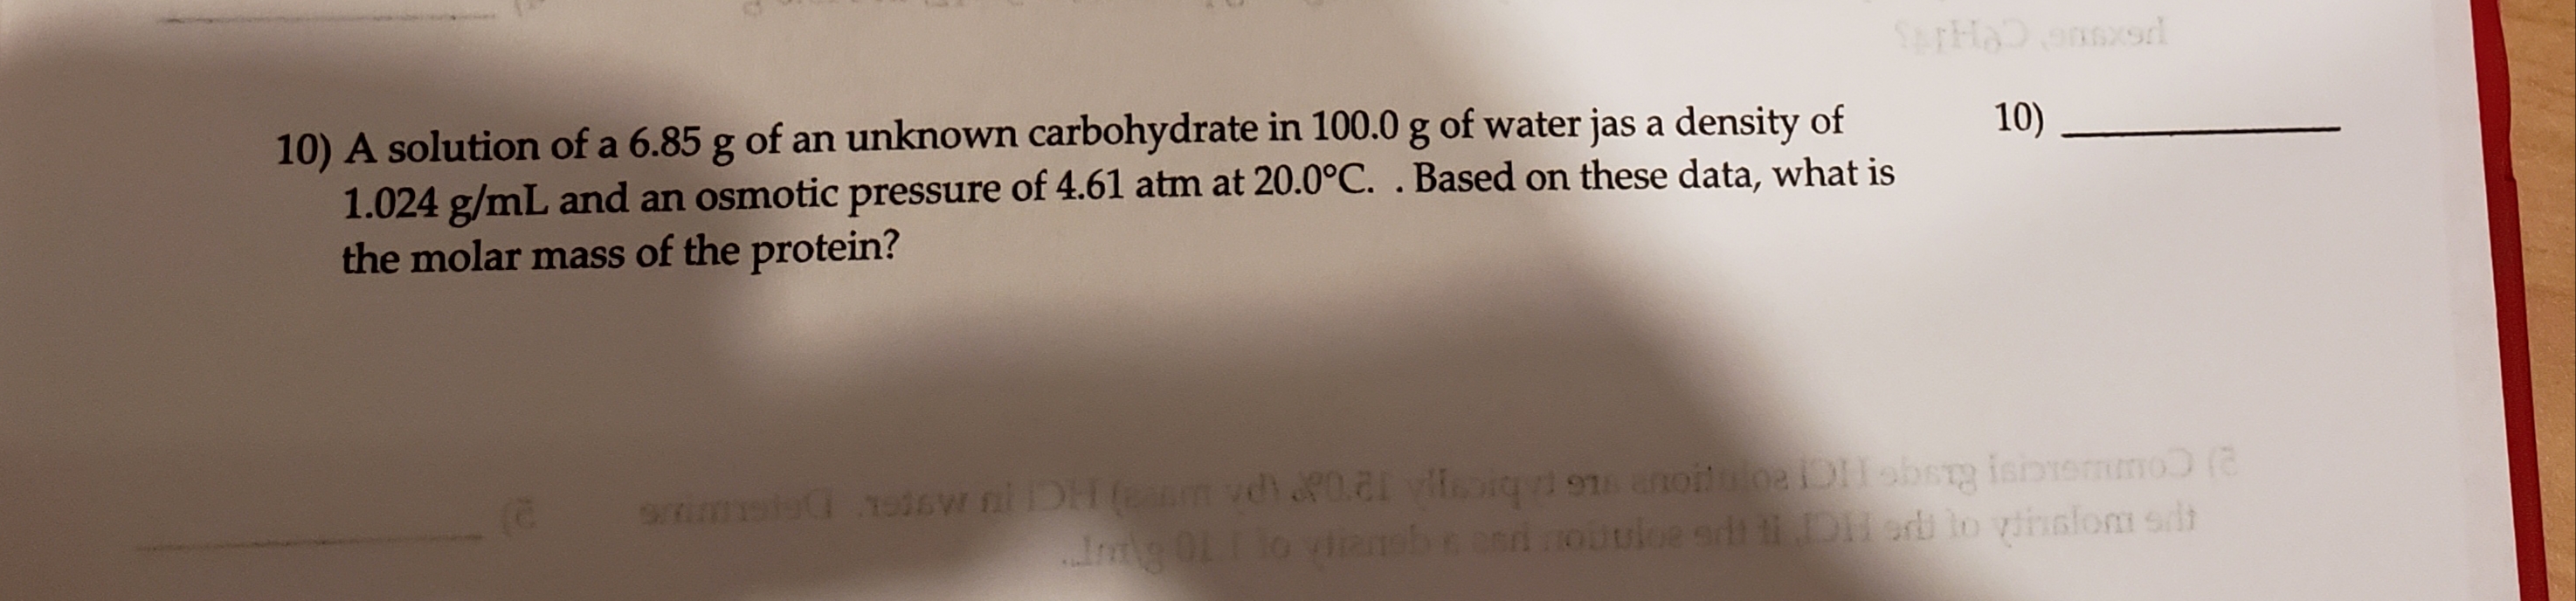 onsord
10) A solution of a 6.85 g of an unknown carbohydrate in 100.0 g of water jas a density of
1.024 g/mL and an osmotic pressure of 4.61 atm at 20.0°C. . Based on these data, what is
the molar mass of the protein?
10)
sw niDH(m vdi0. veoiq 9 enoilloDobsrg isbemno (
I 0Llo vianebeedouuloe adt Derb to vinslom sdlt
mels
